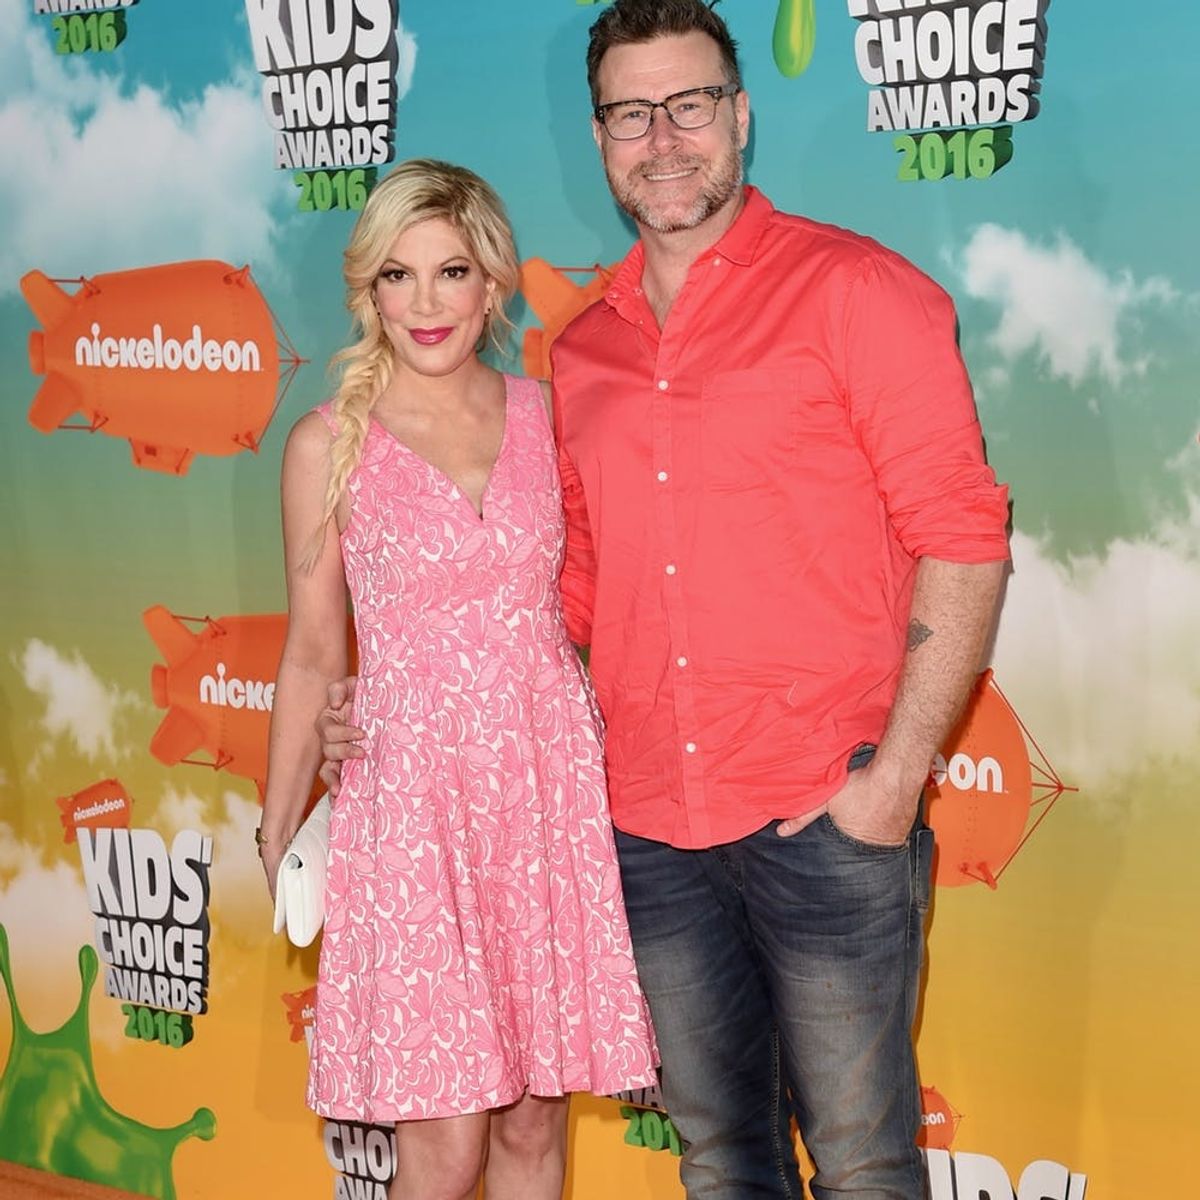 Dean McDermott Just Proposed to Tori Spelling (Again!) In the Cutest Way Possible